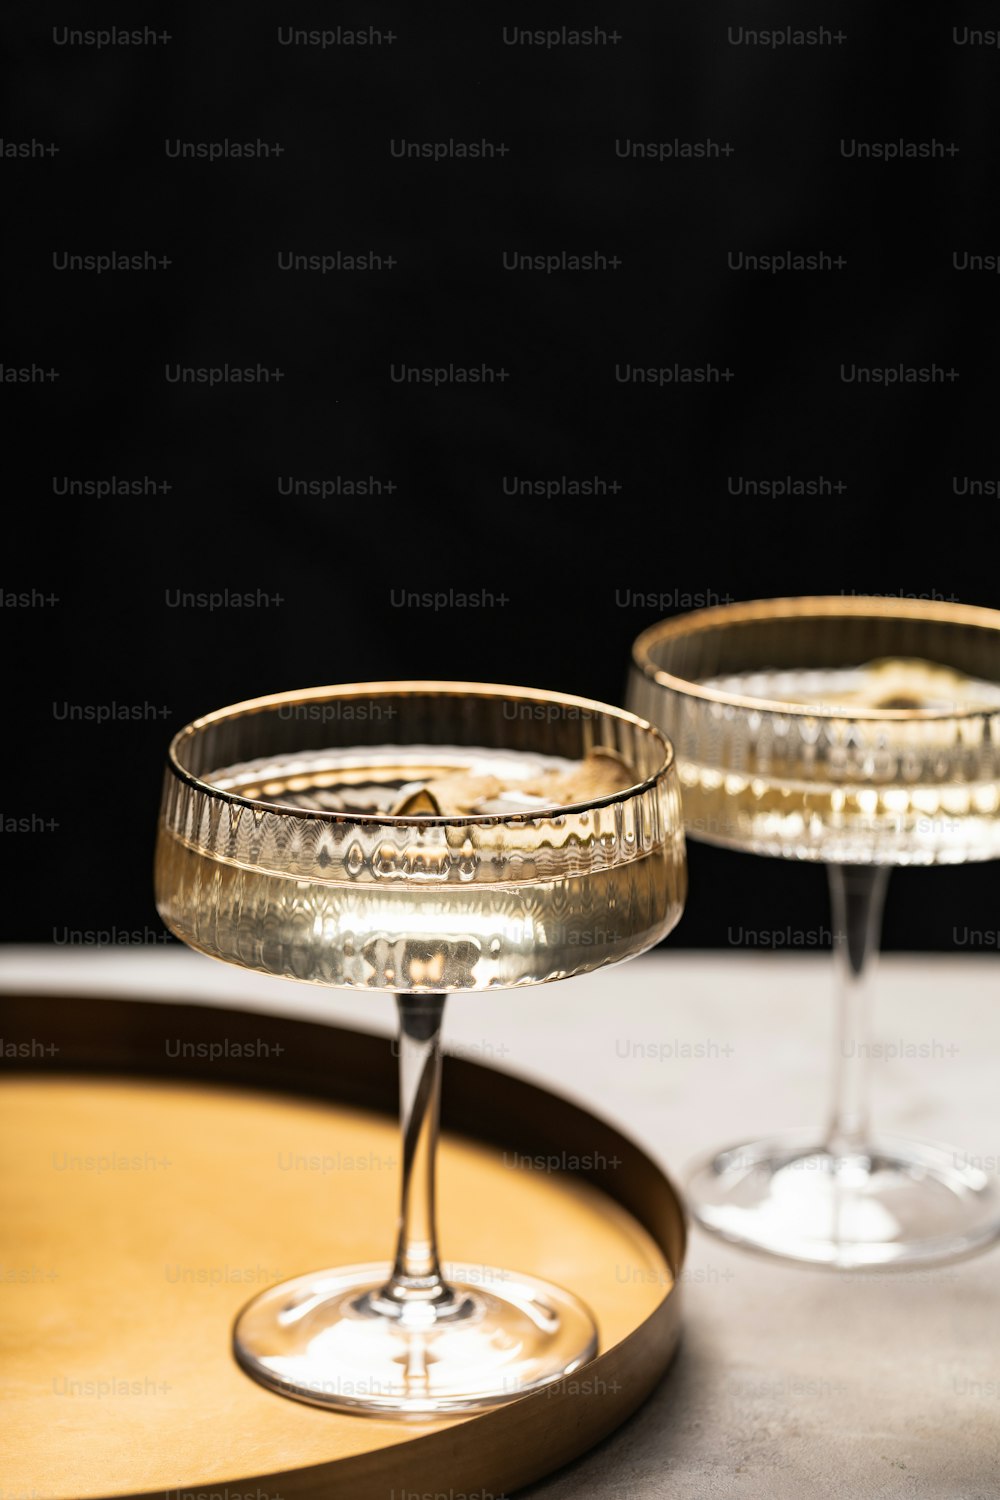 350+ Wine Glass Pictures  Download Free Images & Stock Photos on Unsplash